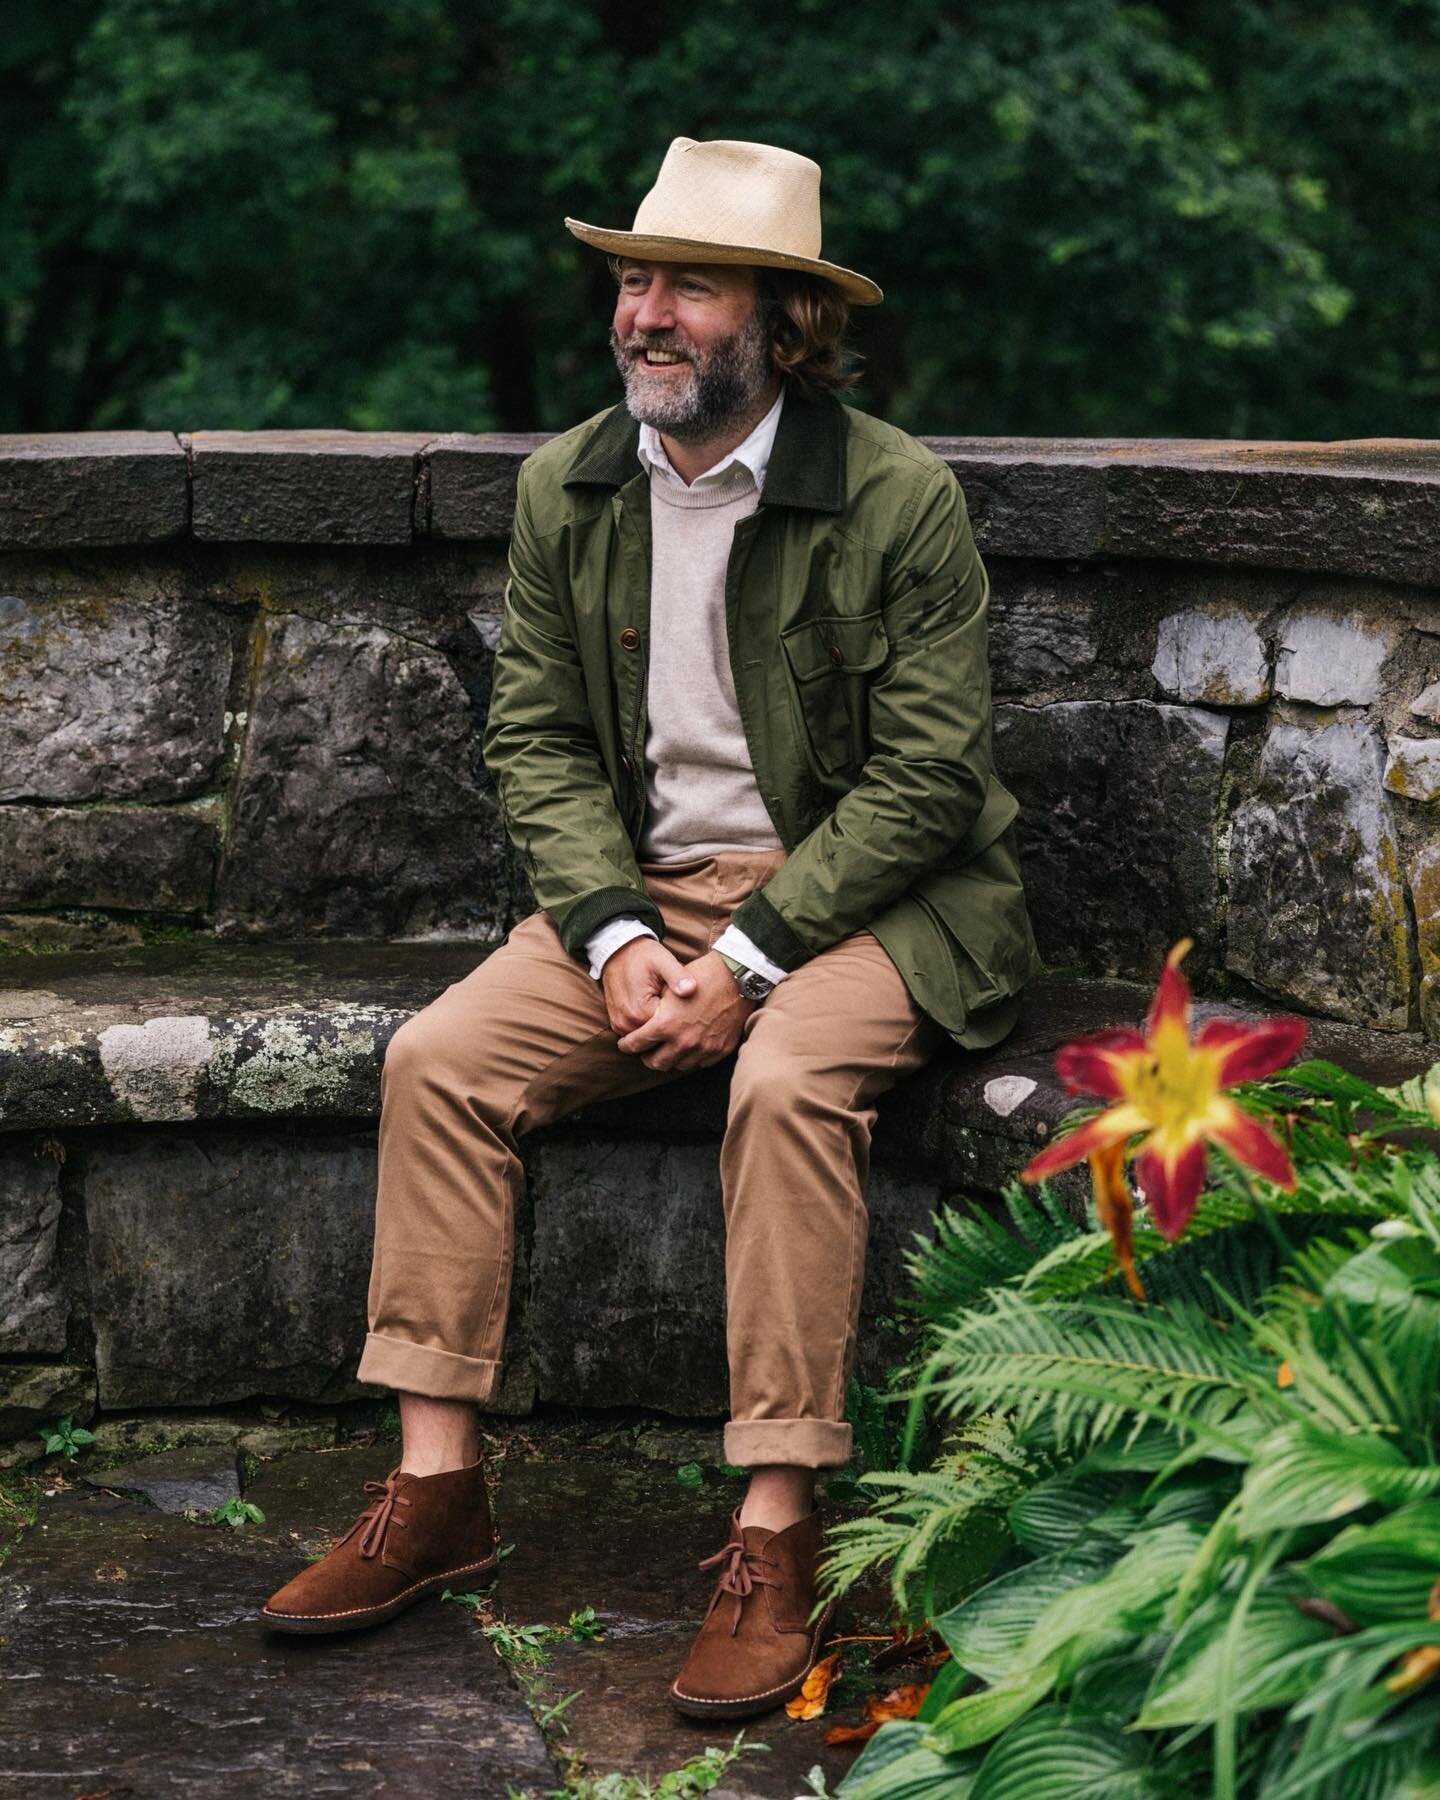 Very excited to share some theories about outdoor style with my friends at @jcrewmens at the great @troutbeck.ny. #injcrew